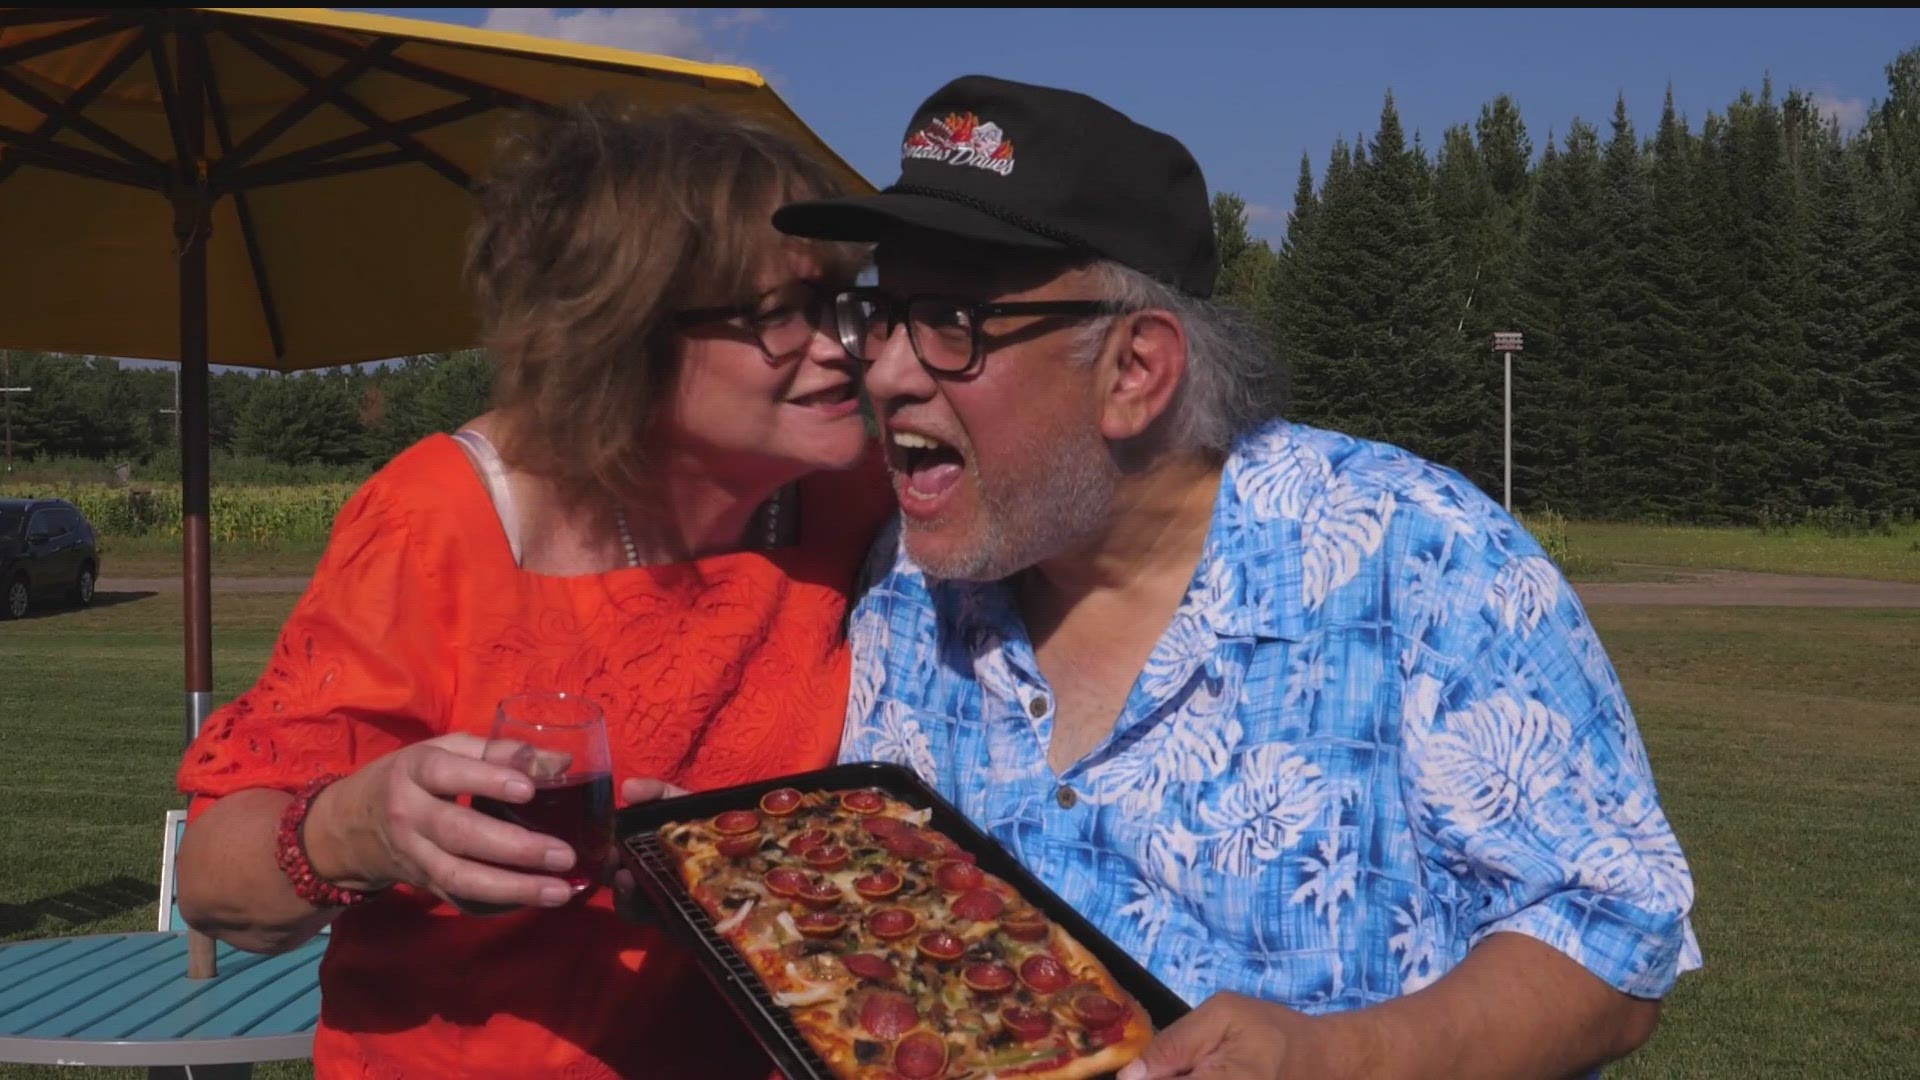 Out of Hayward, Wisconsin, Dave Anderson made award-winning BBQ ribs for years. But as for what's next for him? Pizza.